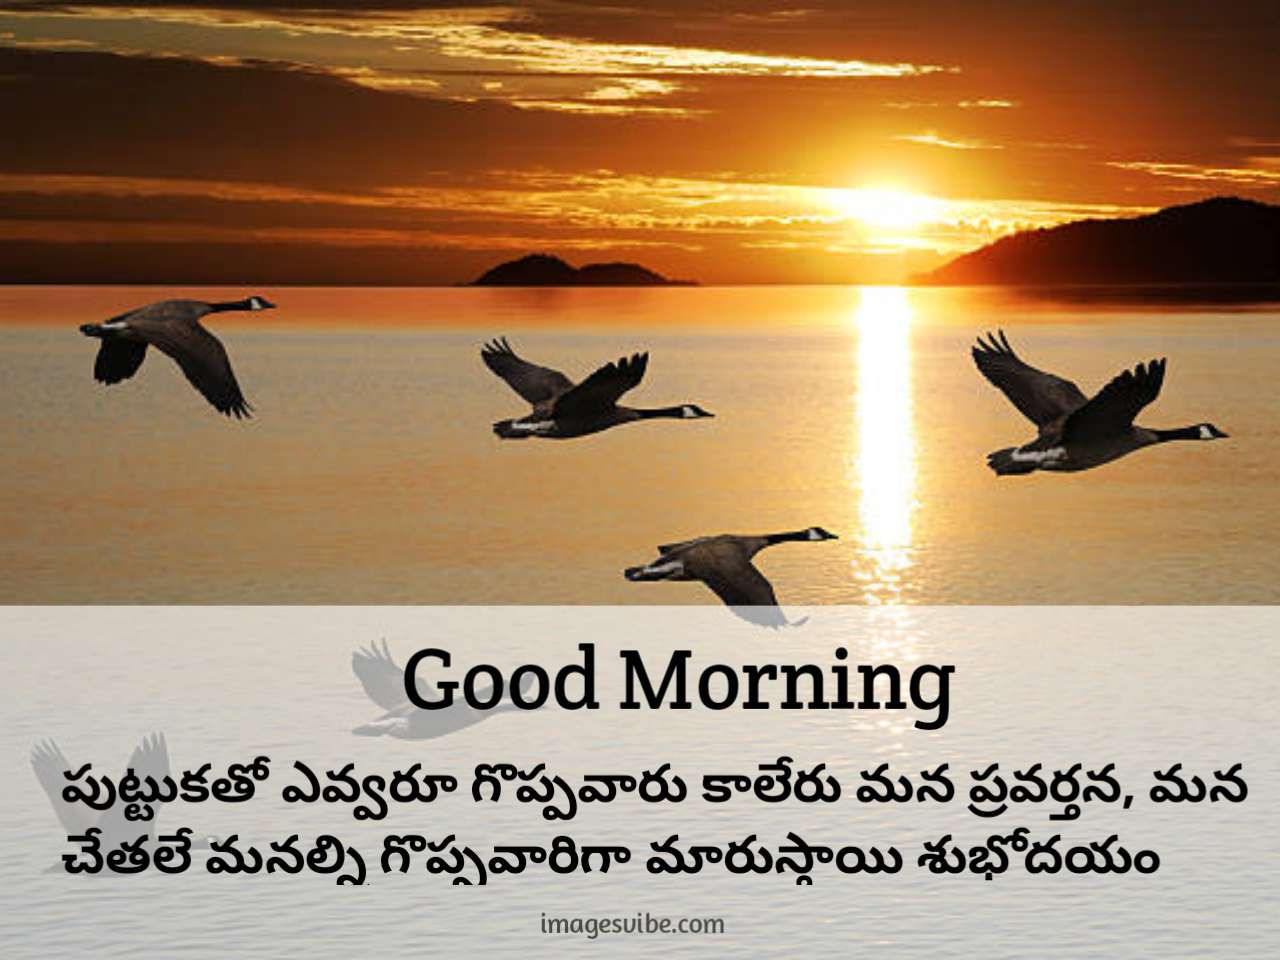 Beautiful Good Morning Telugu Images & Quotes in 2022 - Images Vibe